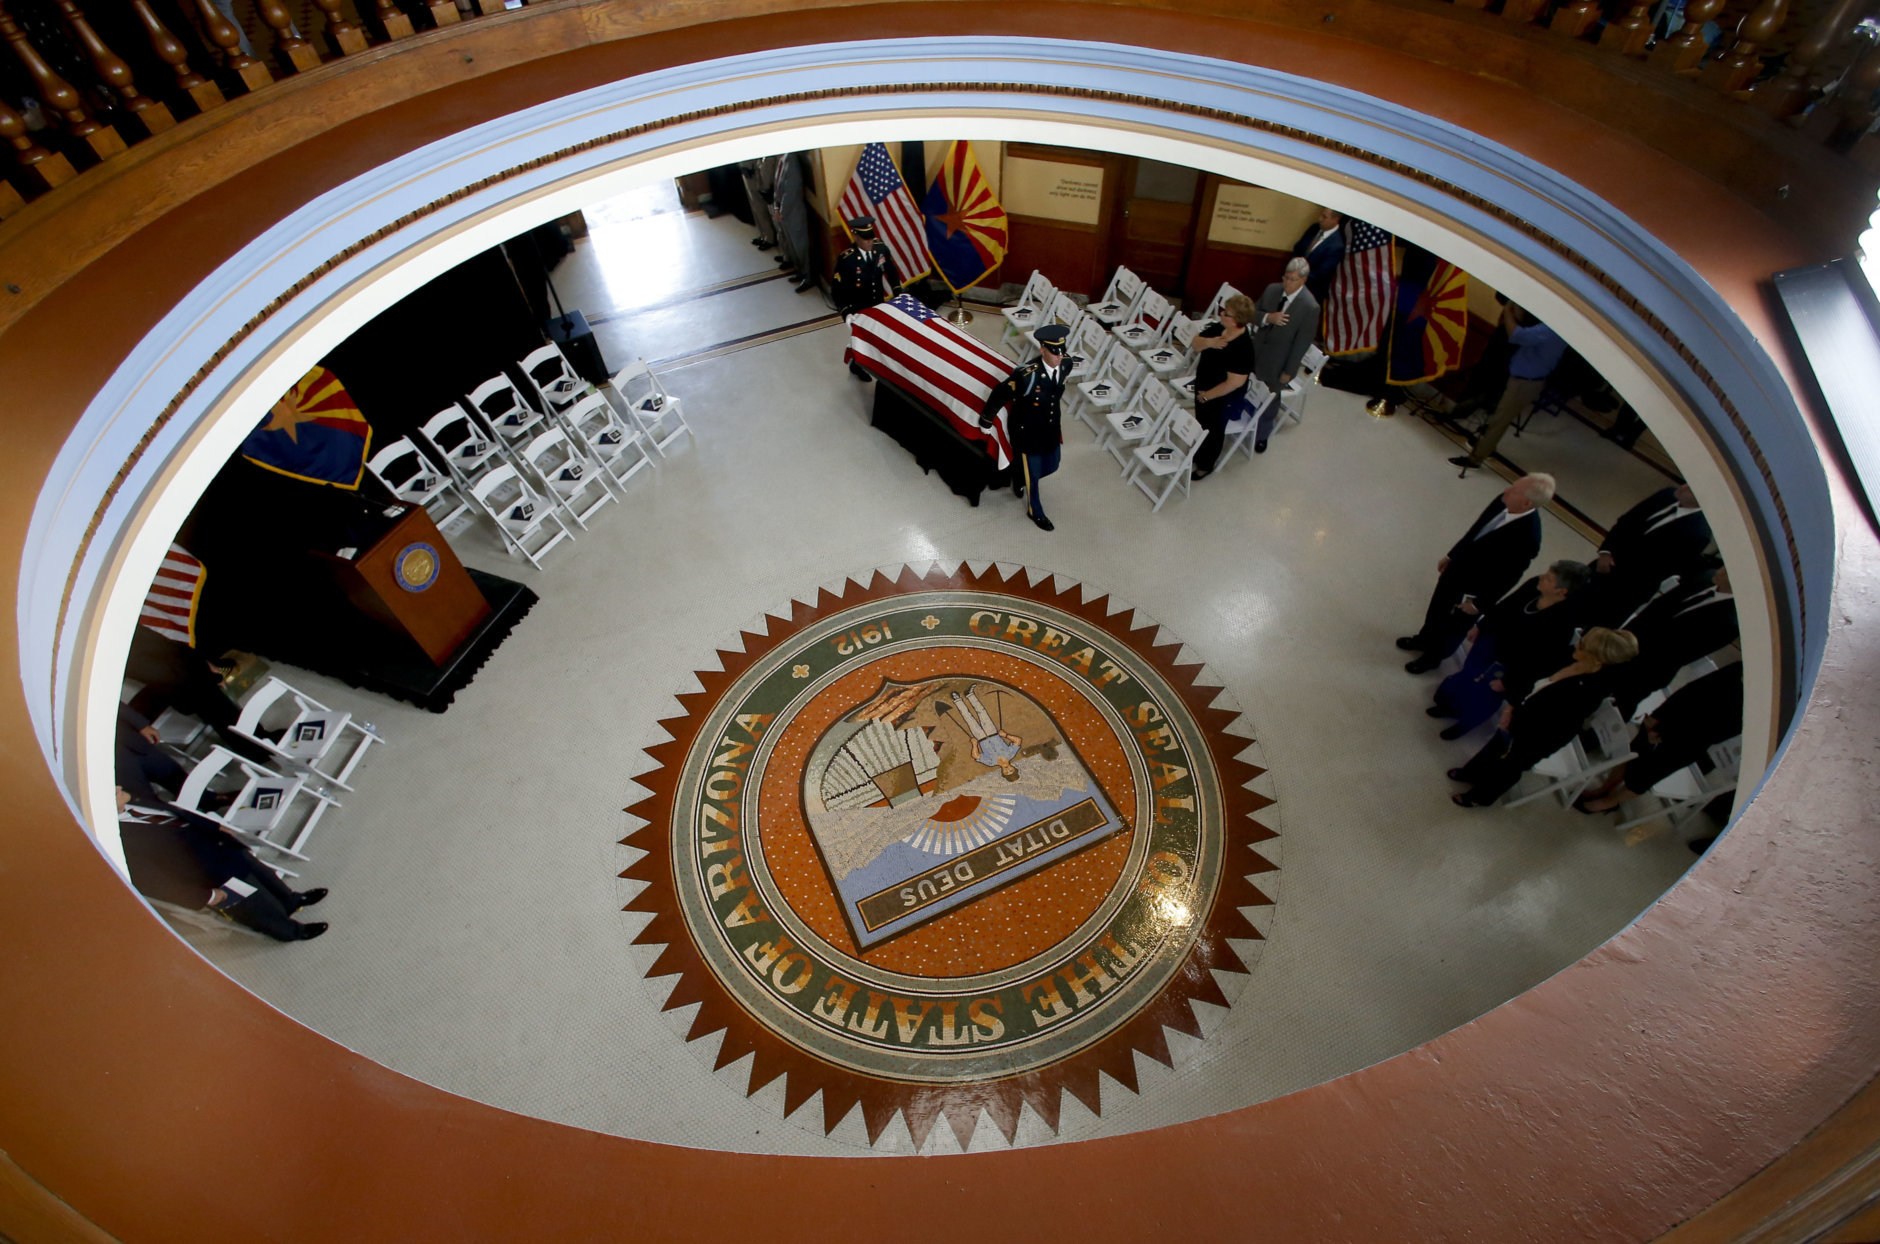 The Arizona National Guard moves the casket into the museum rotunda during a memorial service for Sen. John McCain, R-Ariz. at the Arizona Capitol on Wednesday, Aug. 29, 2018, in Phoenix. (AP Photo/Ross D. Franklin, Pool)